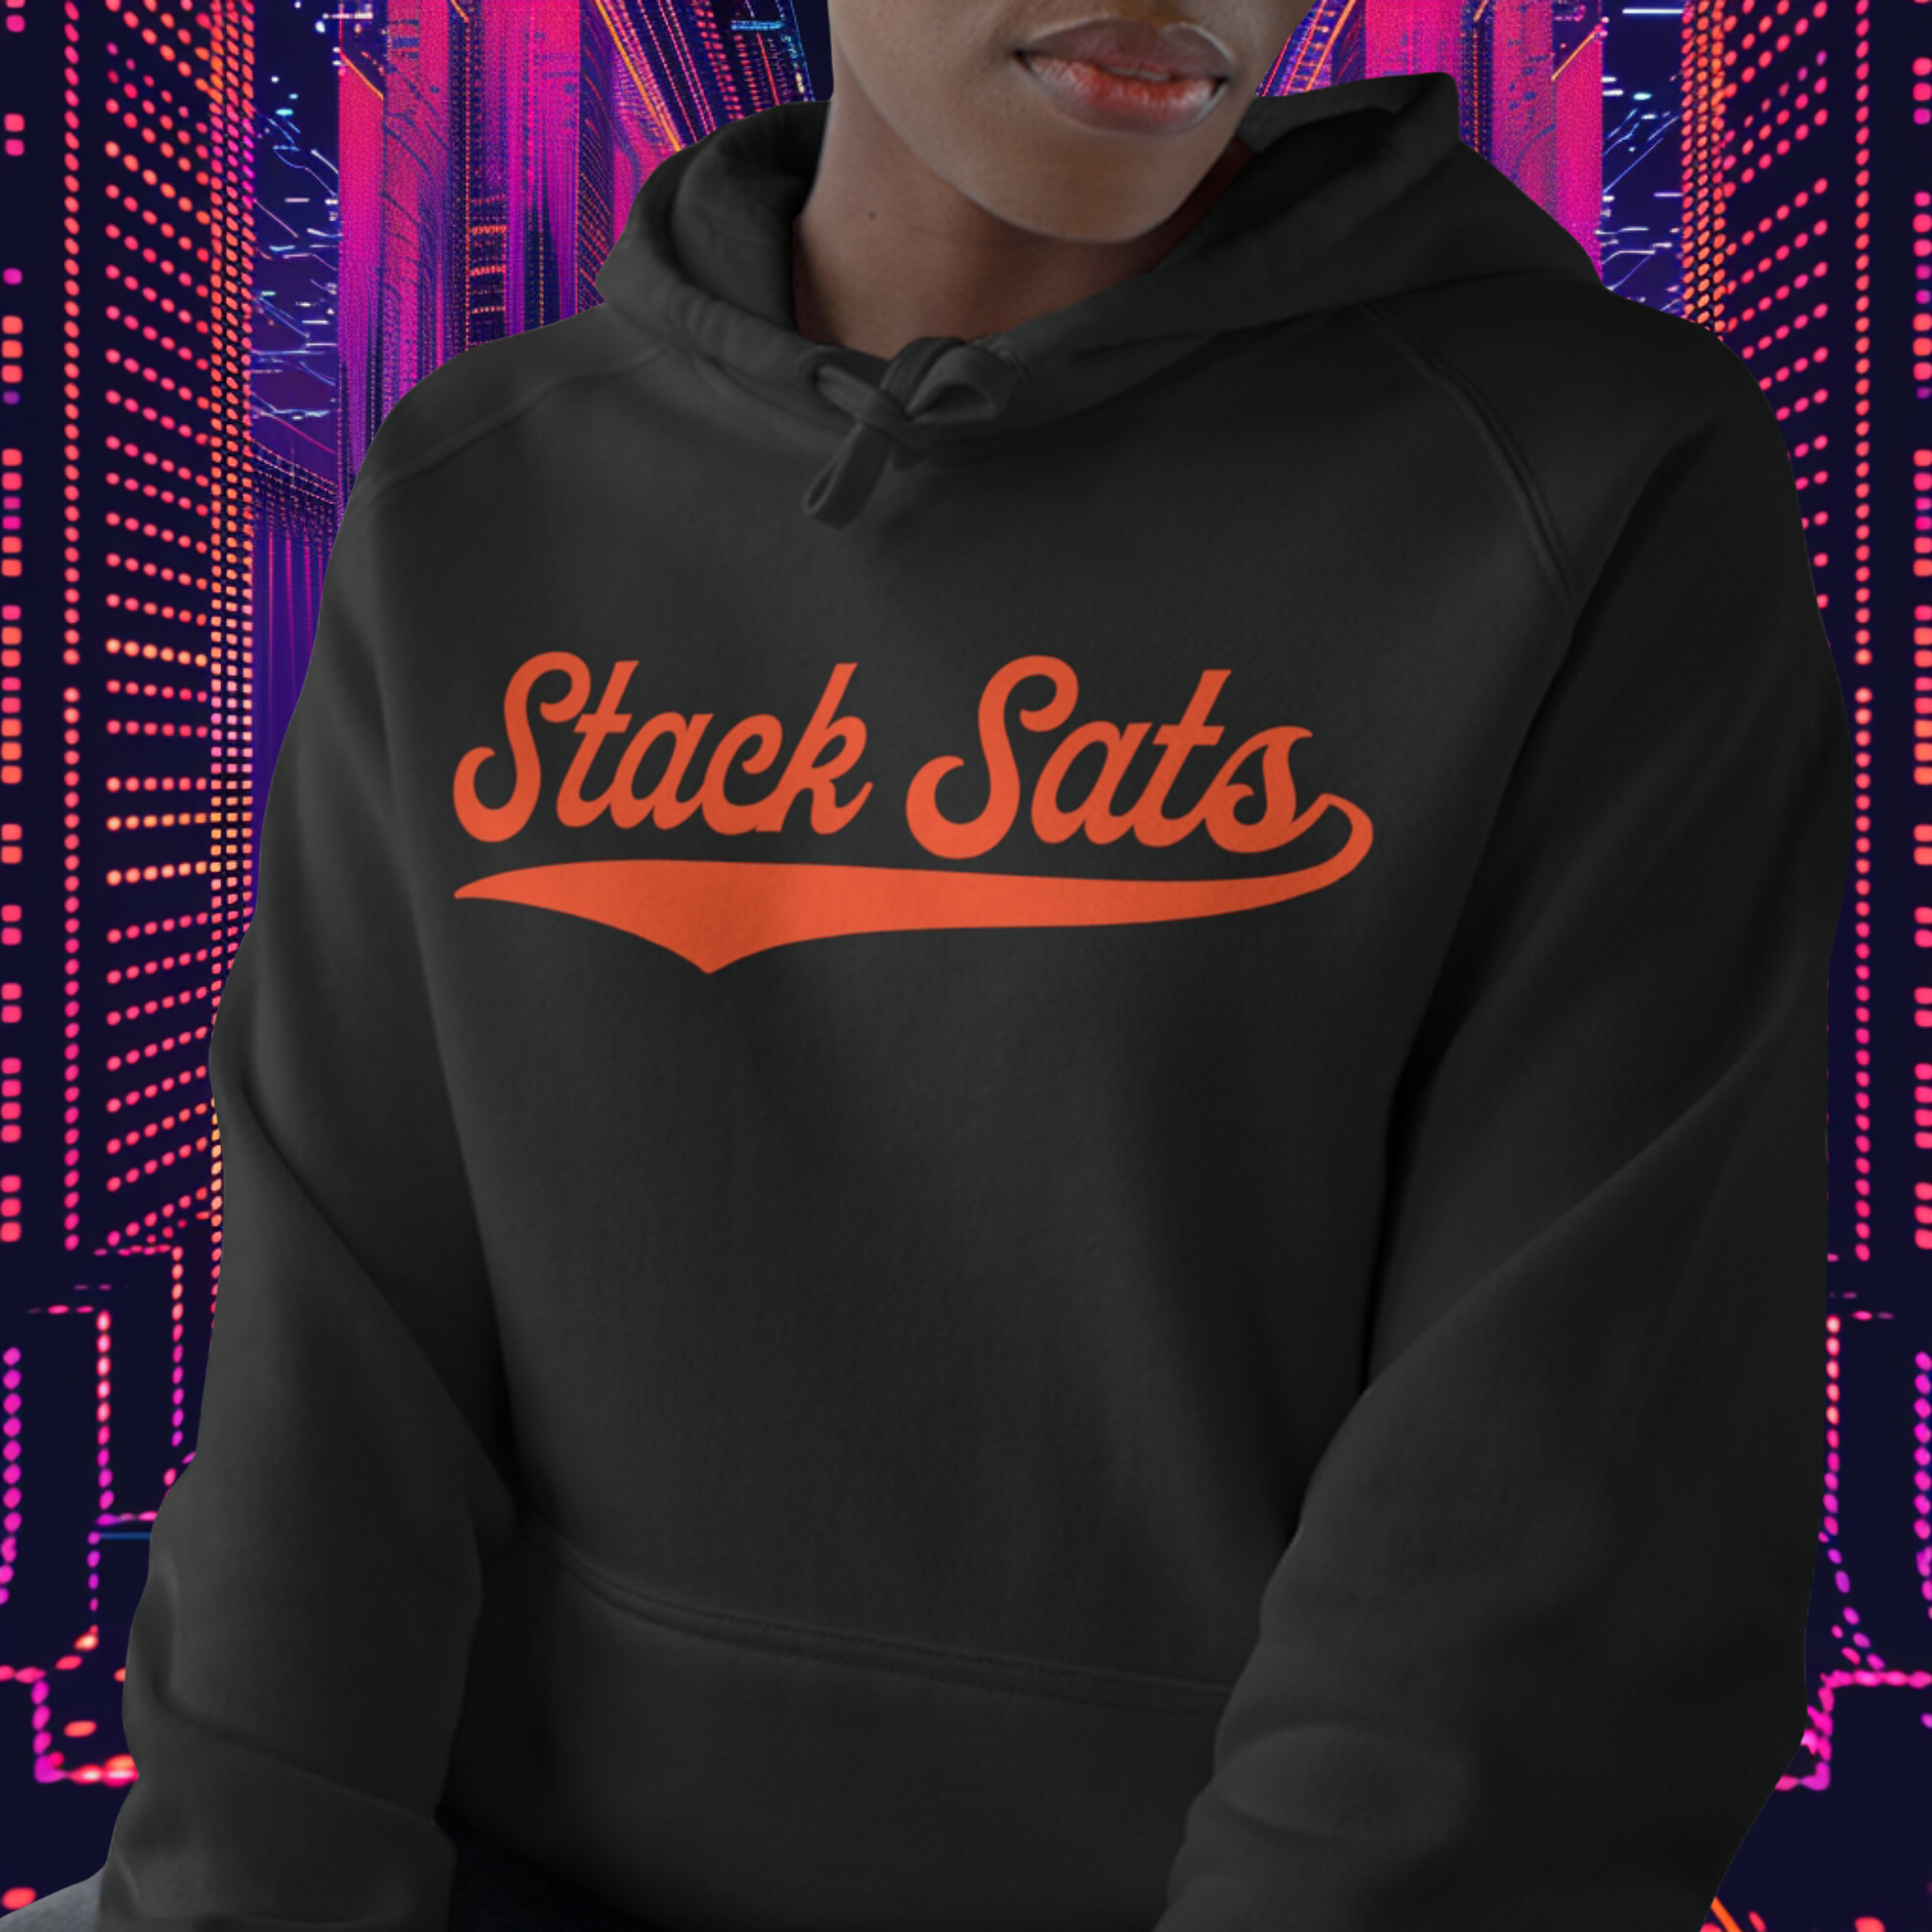  Stack Sats Hoodie (Orange Logo). Female model. Front view. Available at NEONCRYPTO STORE. 